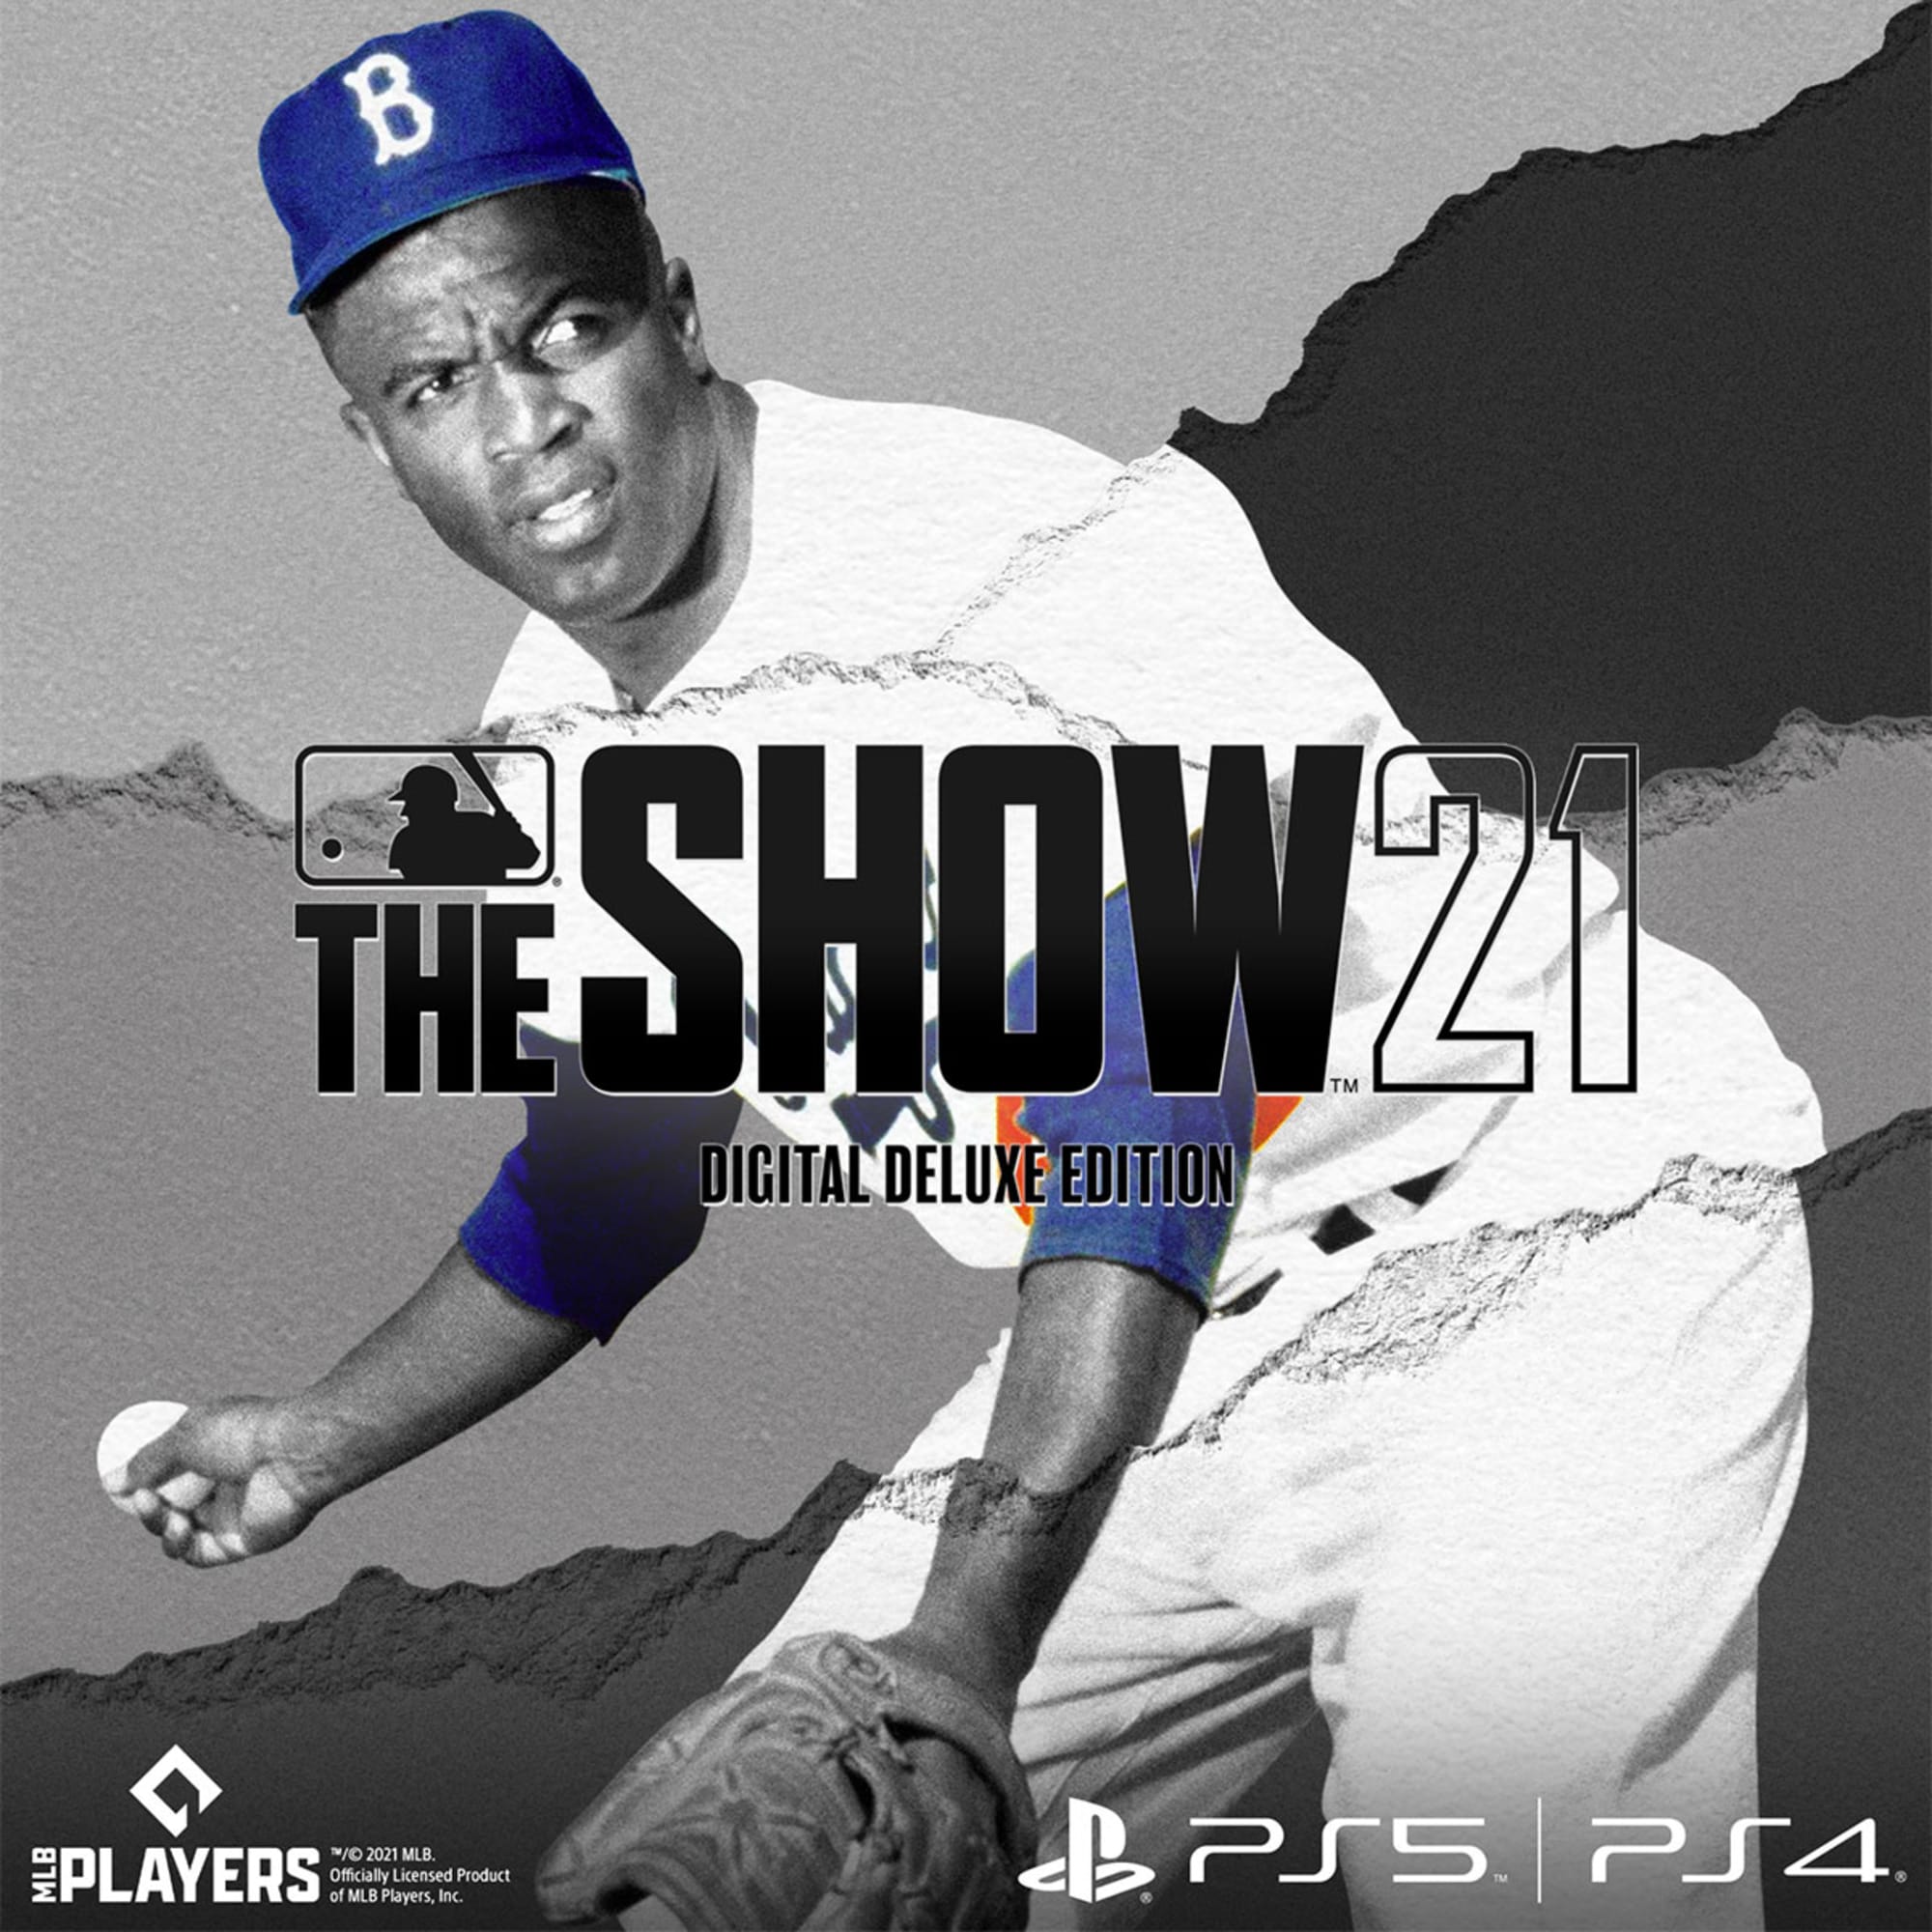 mlb the show 21 download ps4